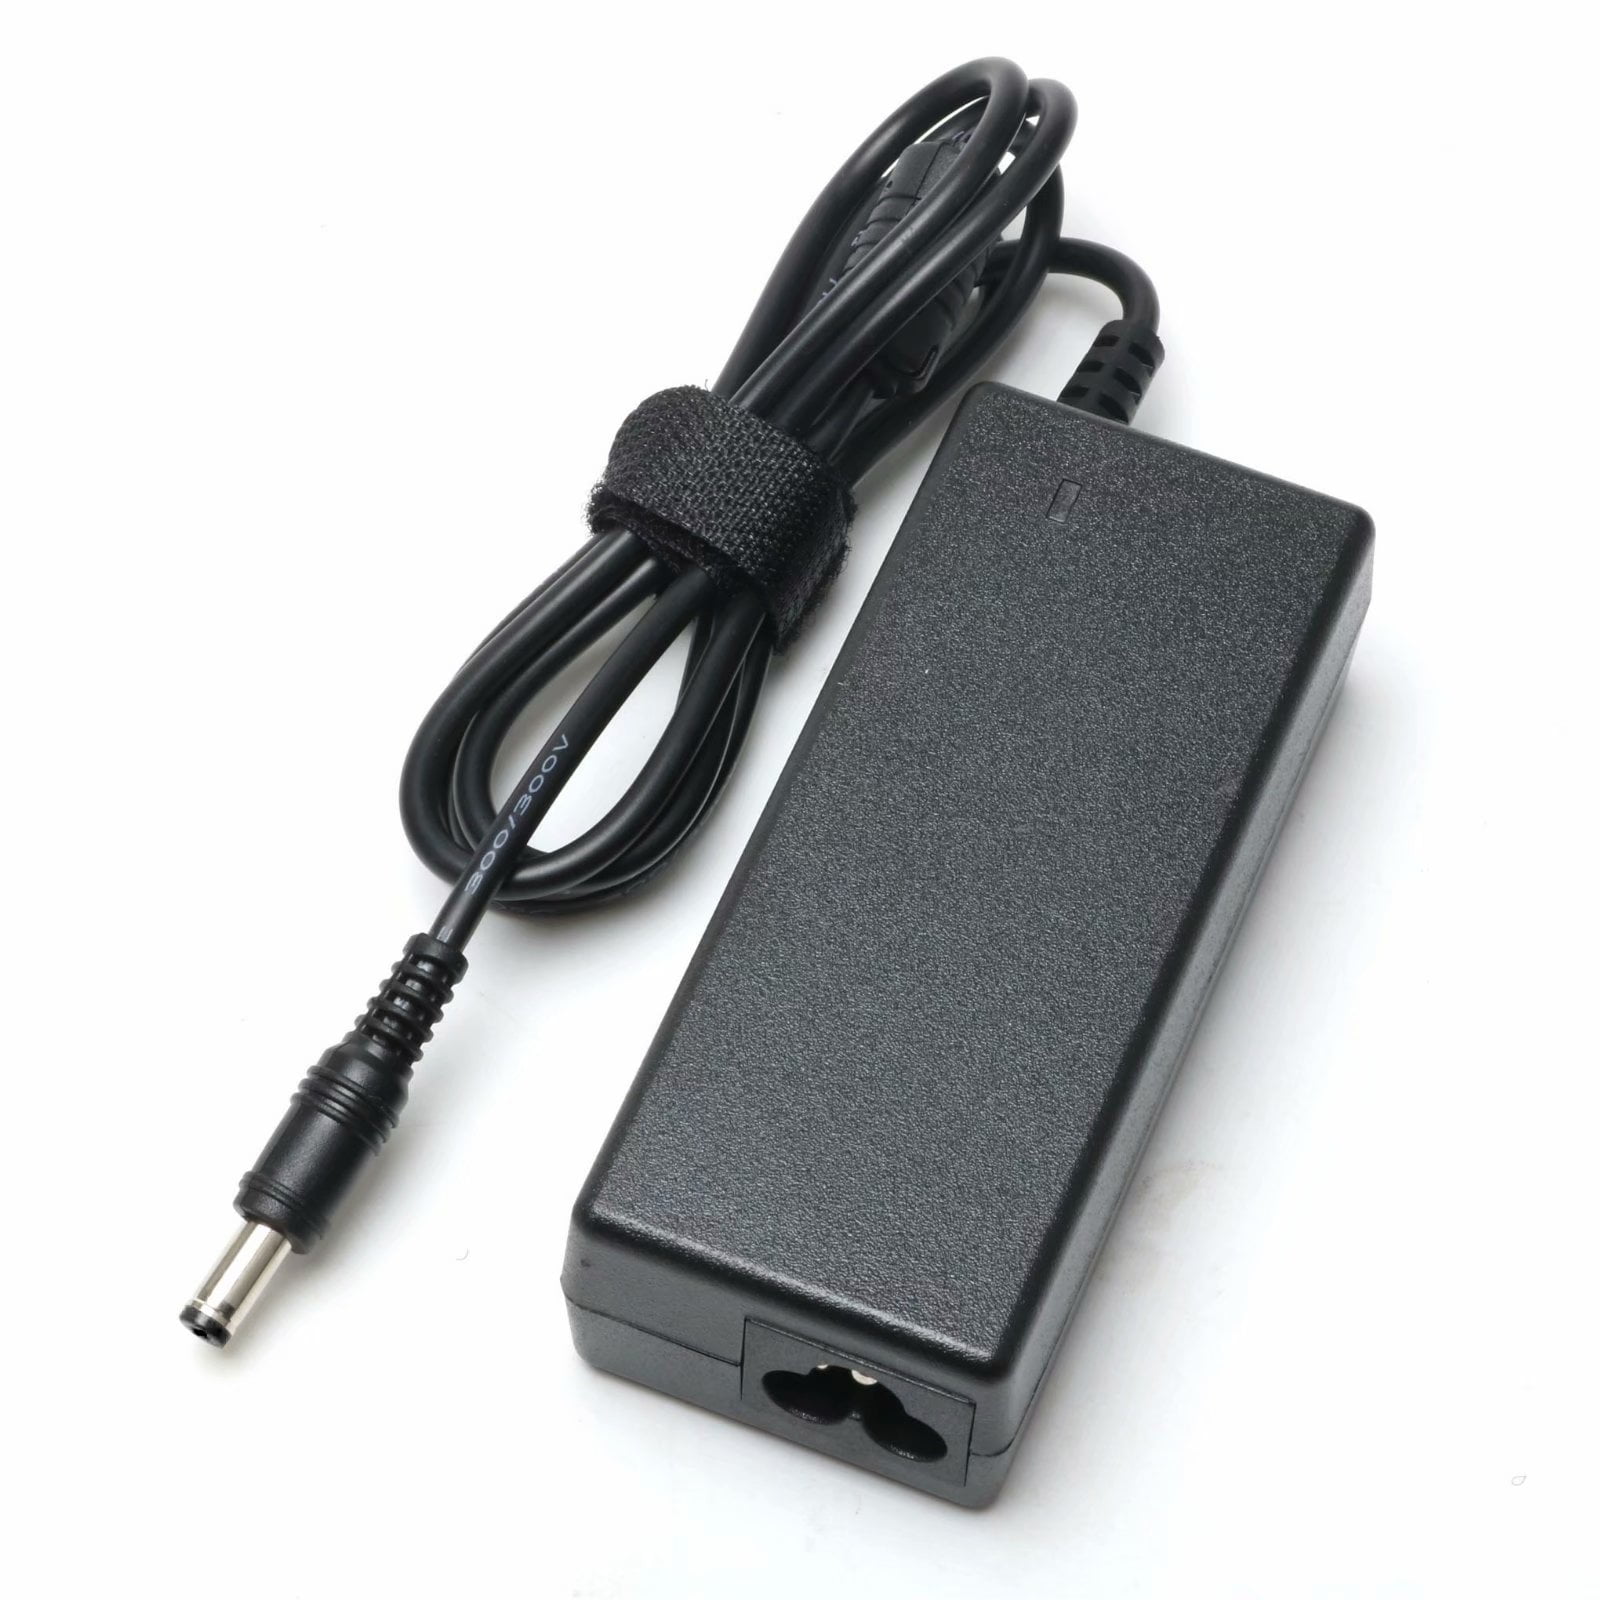 Facmogu 60W 12V 5A AC/DC Power Adapter, 100-240V AC to DC 12V 5A Power  Suppy, 12 Volts 5 Amps AC DC Table Top Adapter, 60 Watts 12V 5A Switching  Power